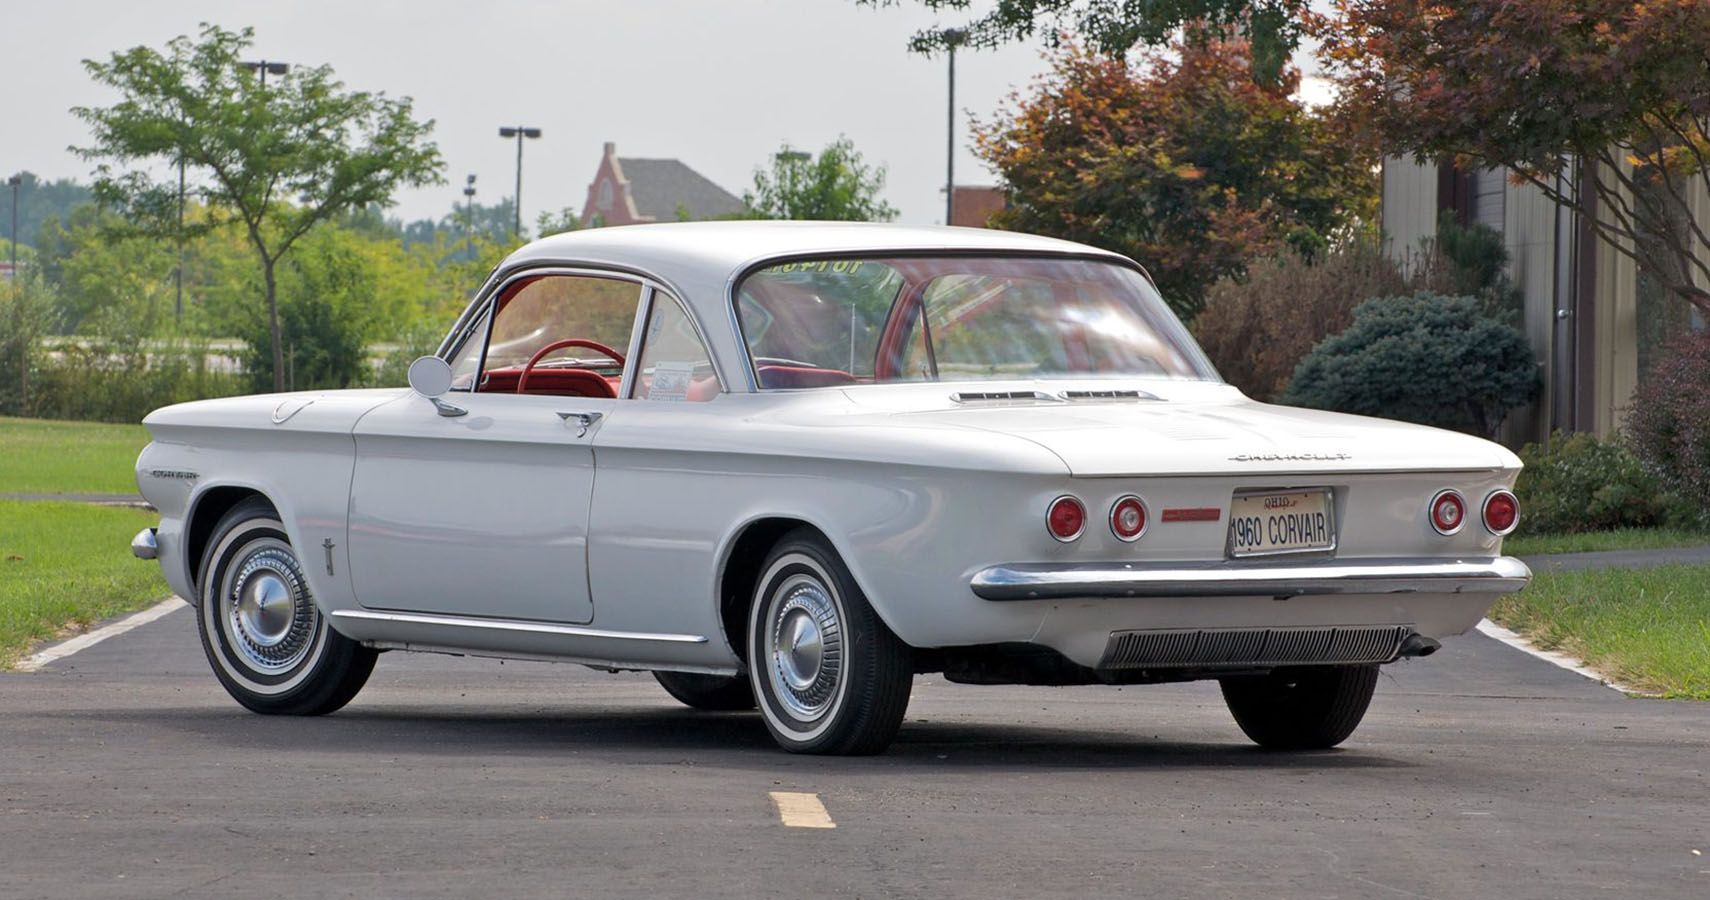 The Corvair Monza Began Life In 1960 Itself As A Two-Door Club Coupe With Bucket Seats And The Fast Uptake Of The Car Made Chevy Realize Its True Potential